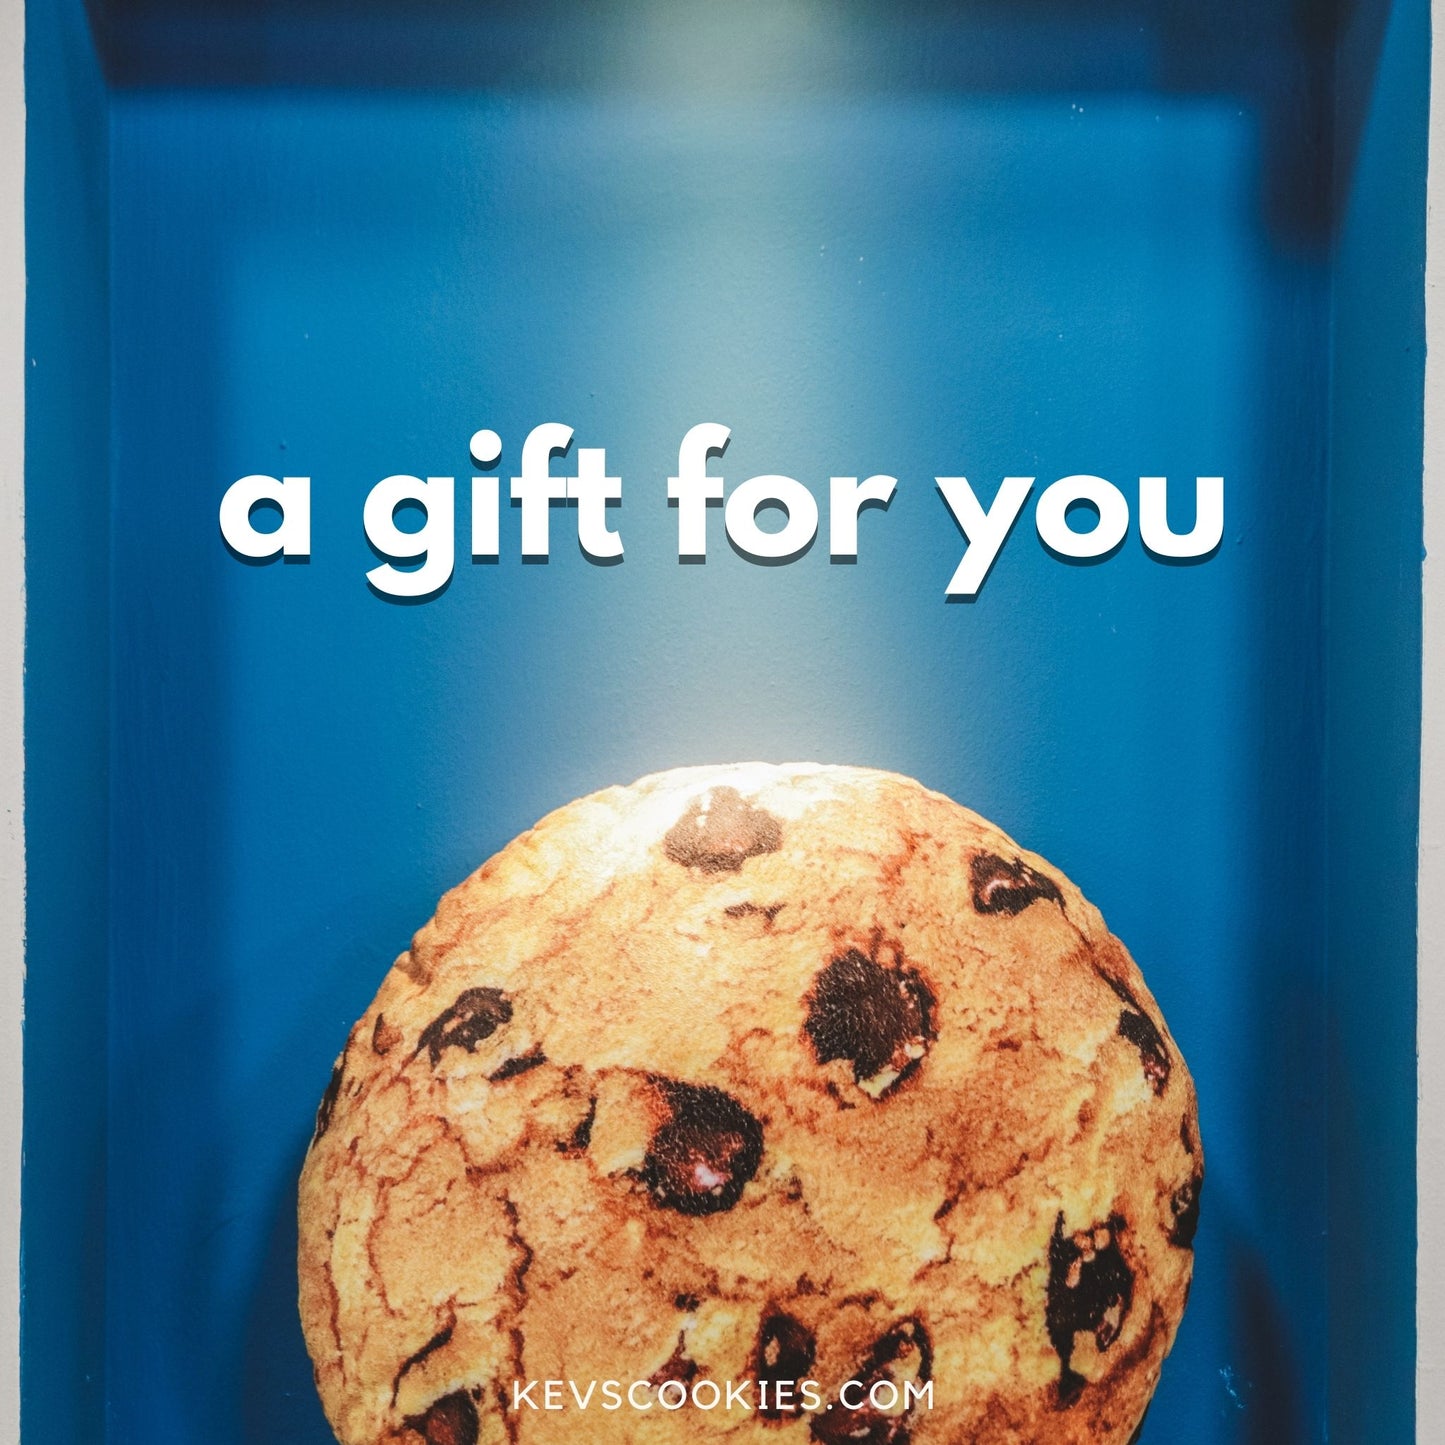 Kev's Cookies E-Gift Cards